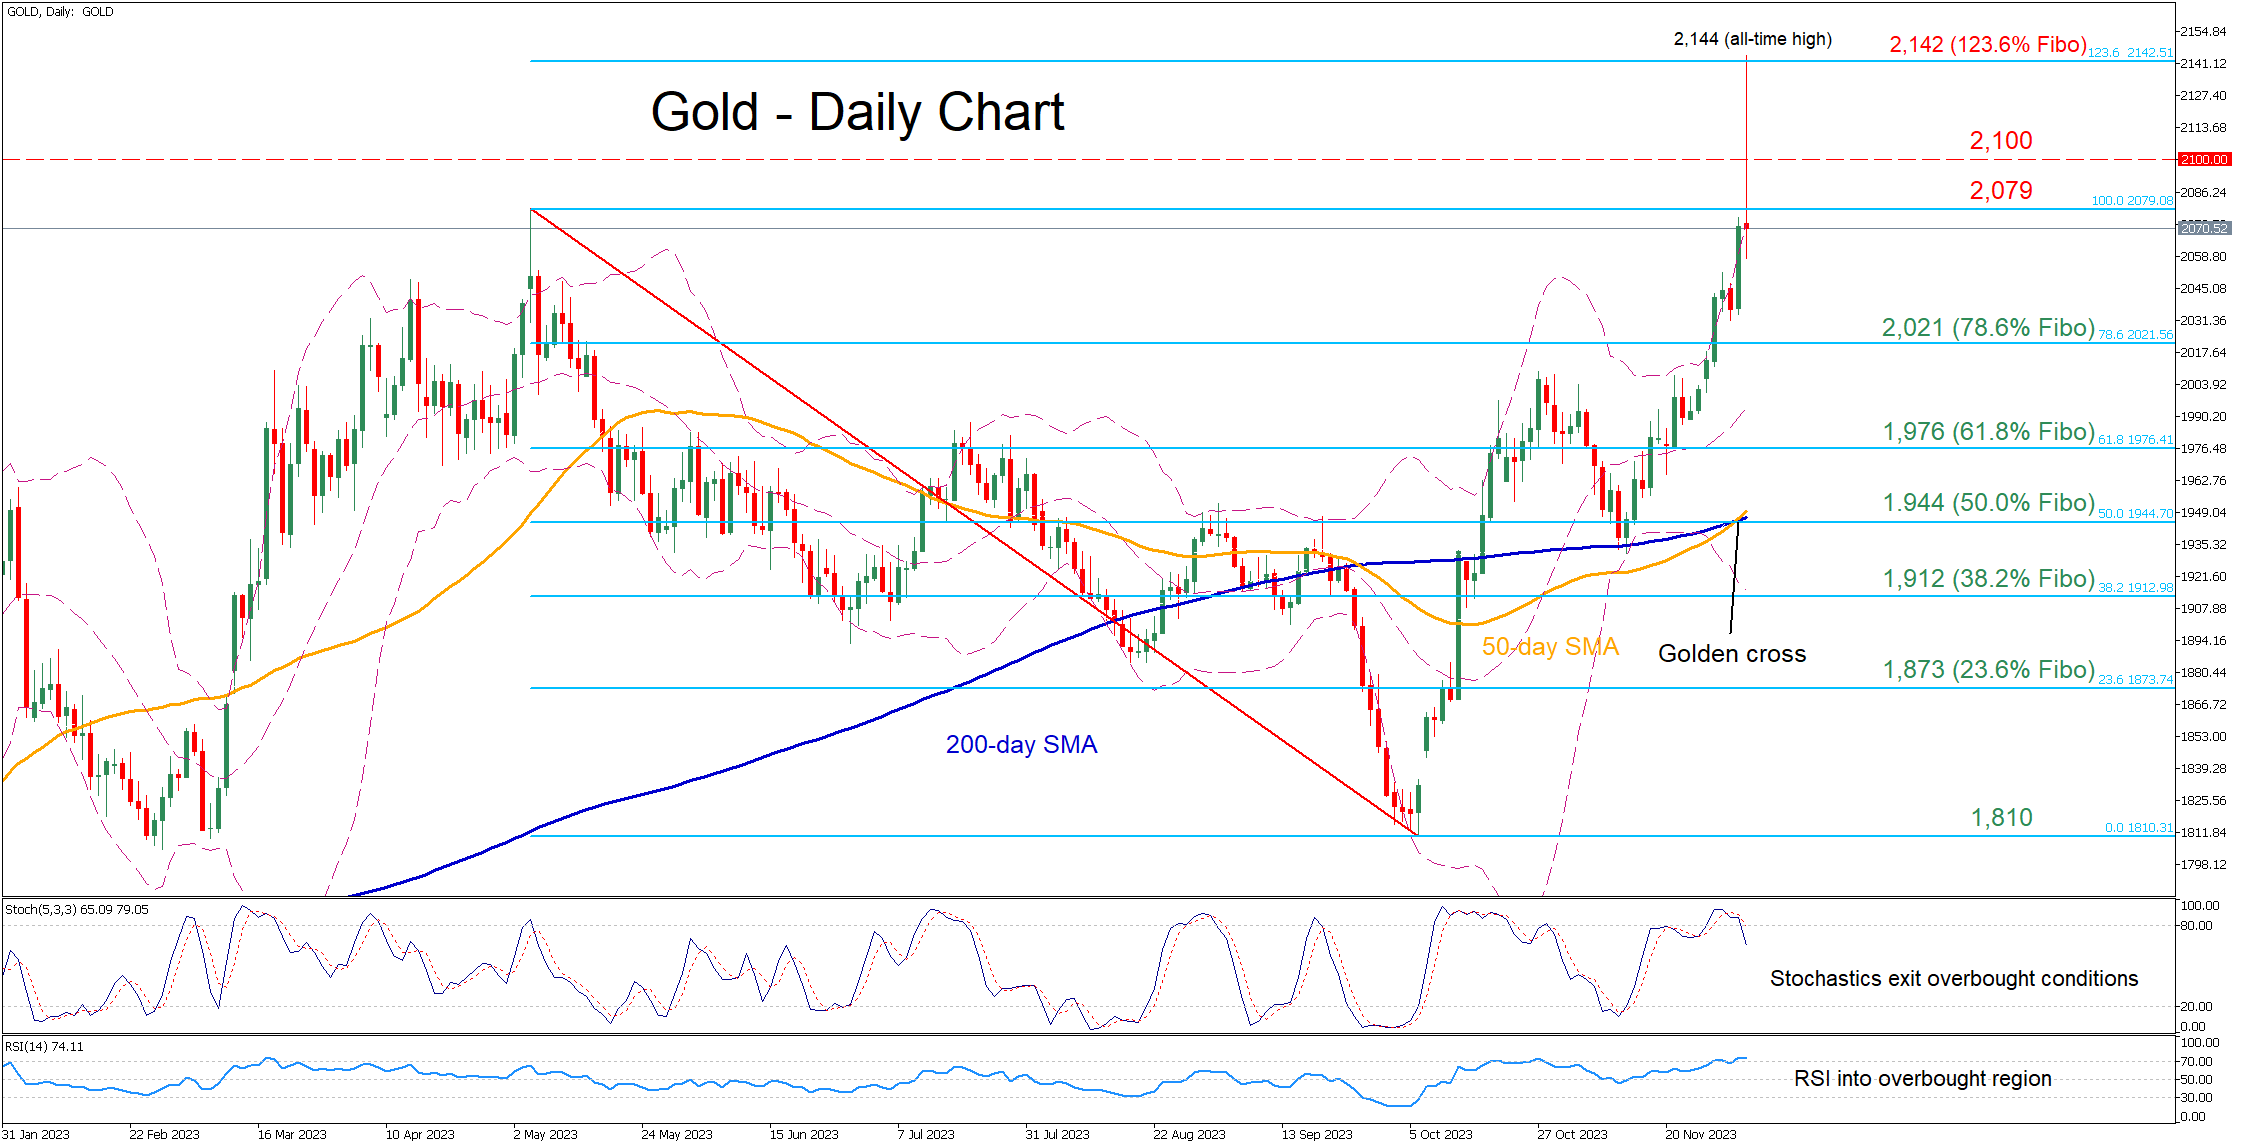 Gold Hits Record High Before Retracing: An Analysis of Current Market Dynamics